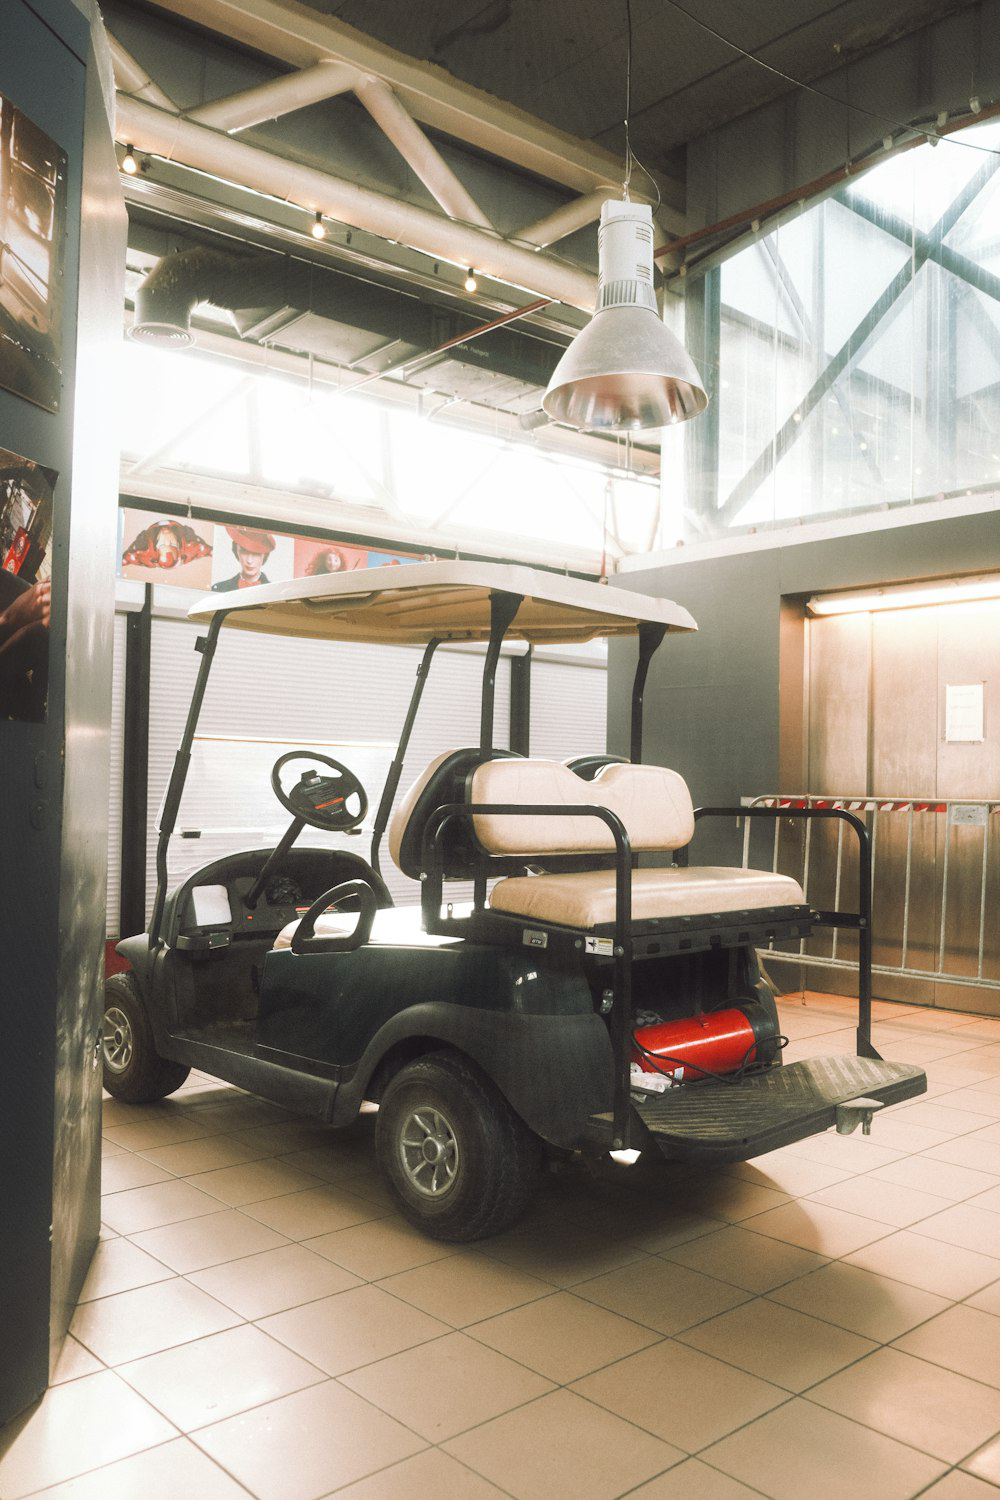 How to Choose the Right Replacement Parts for Your Golf Cart